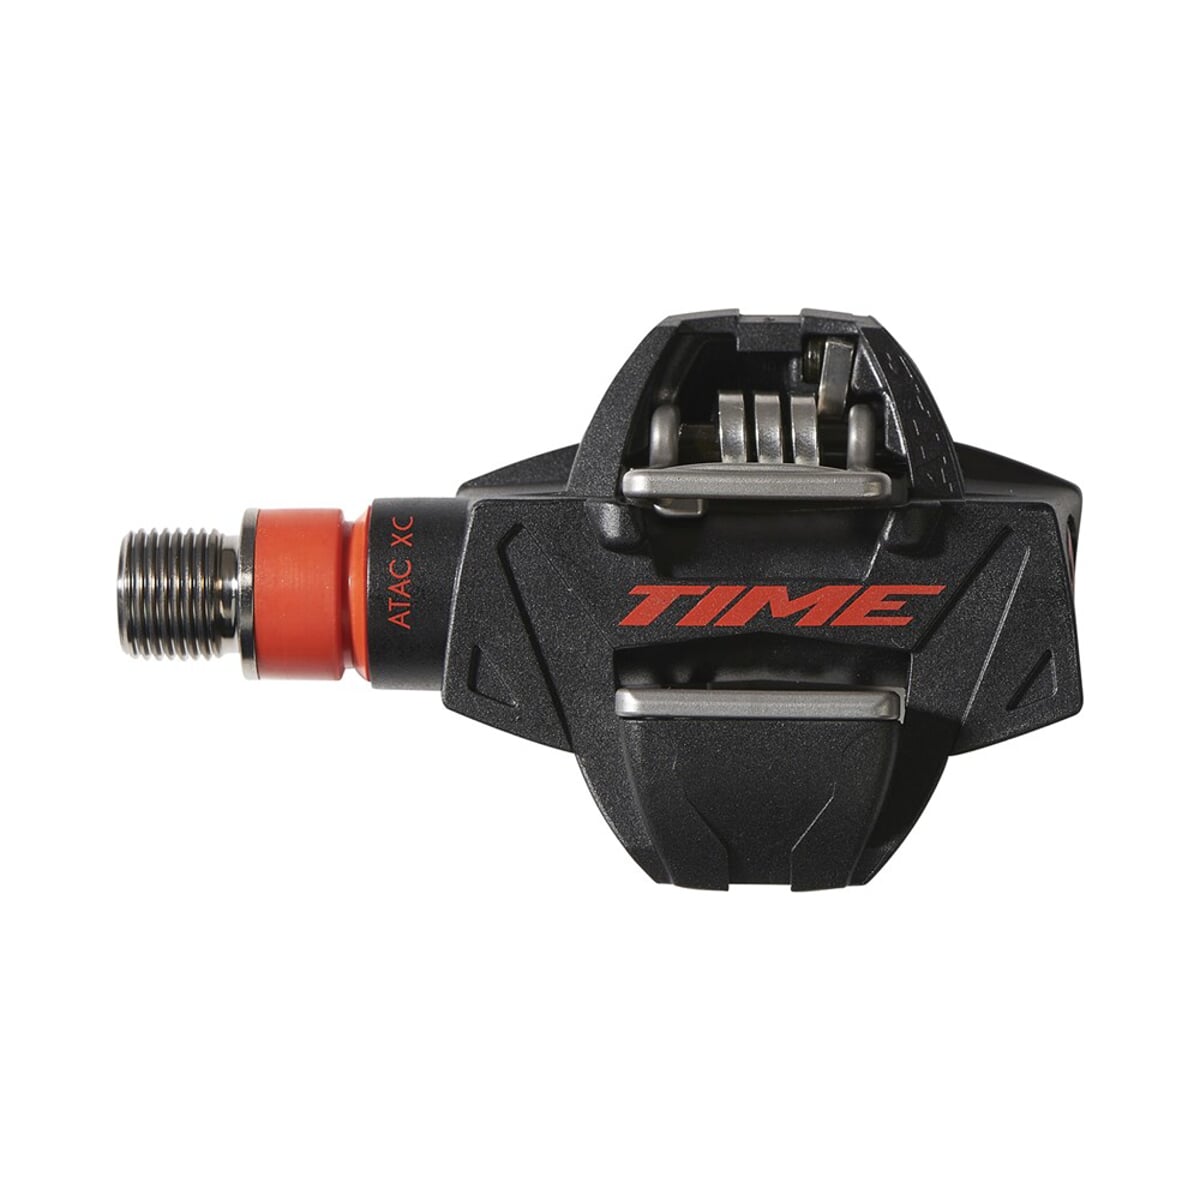 PEDÁLY TIME PD ATAC XC 12 BLACK RED - Uni BLACK RED